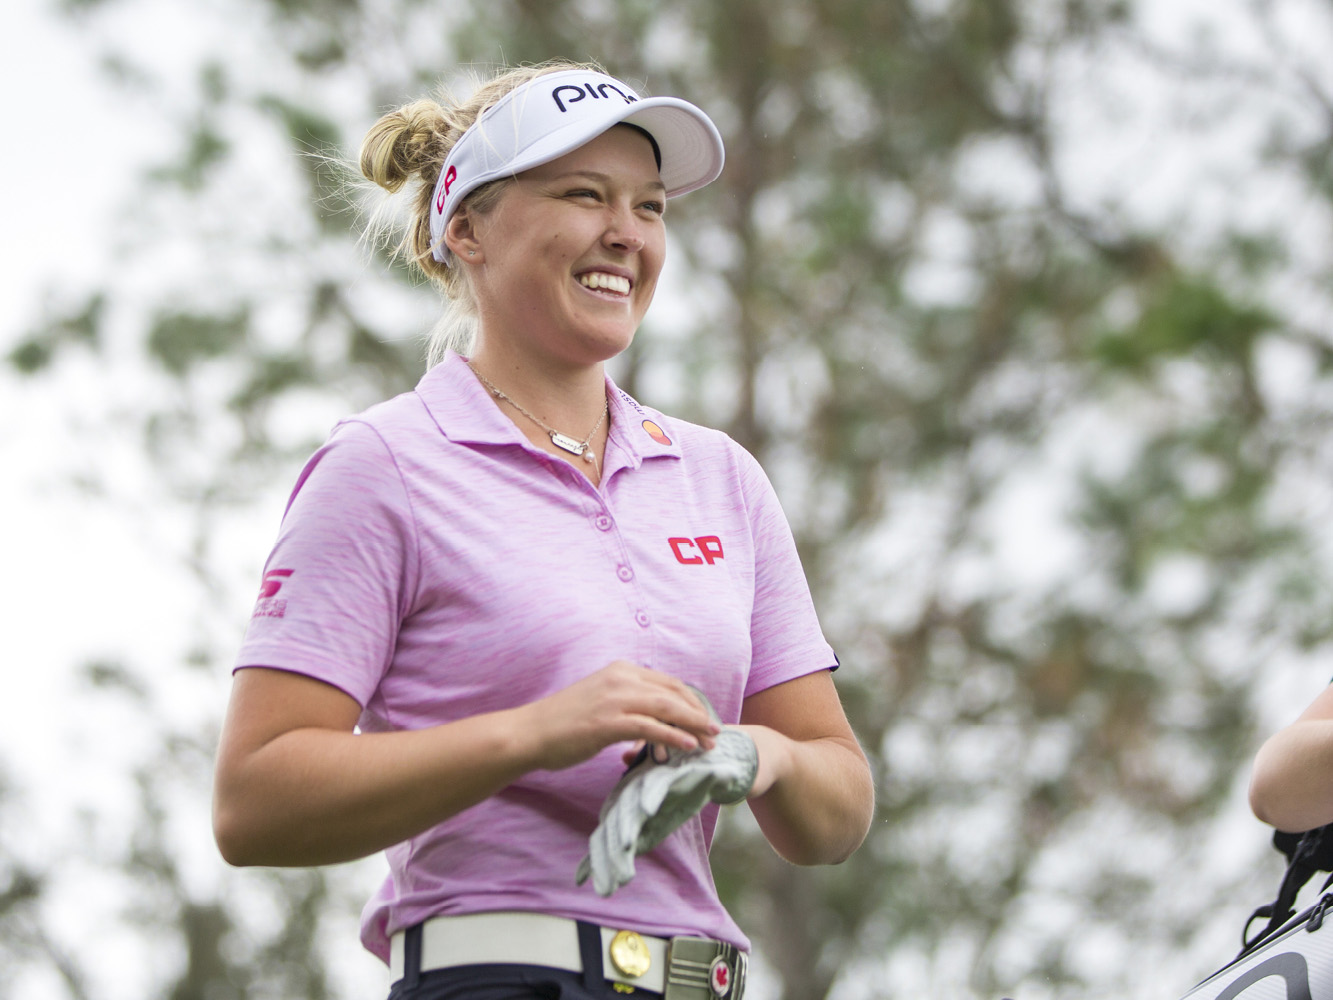 Canadian professional golfer Brooke Henderson is qualified to compete in the 2019 Diamond Resorts Tournament of Champions.